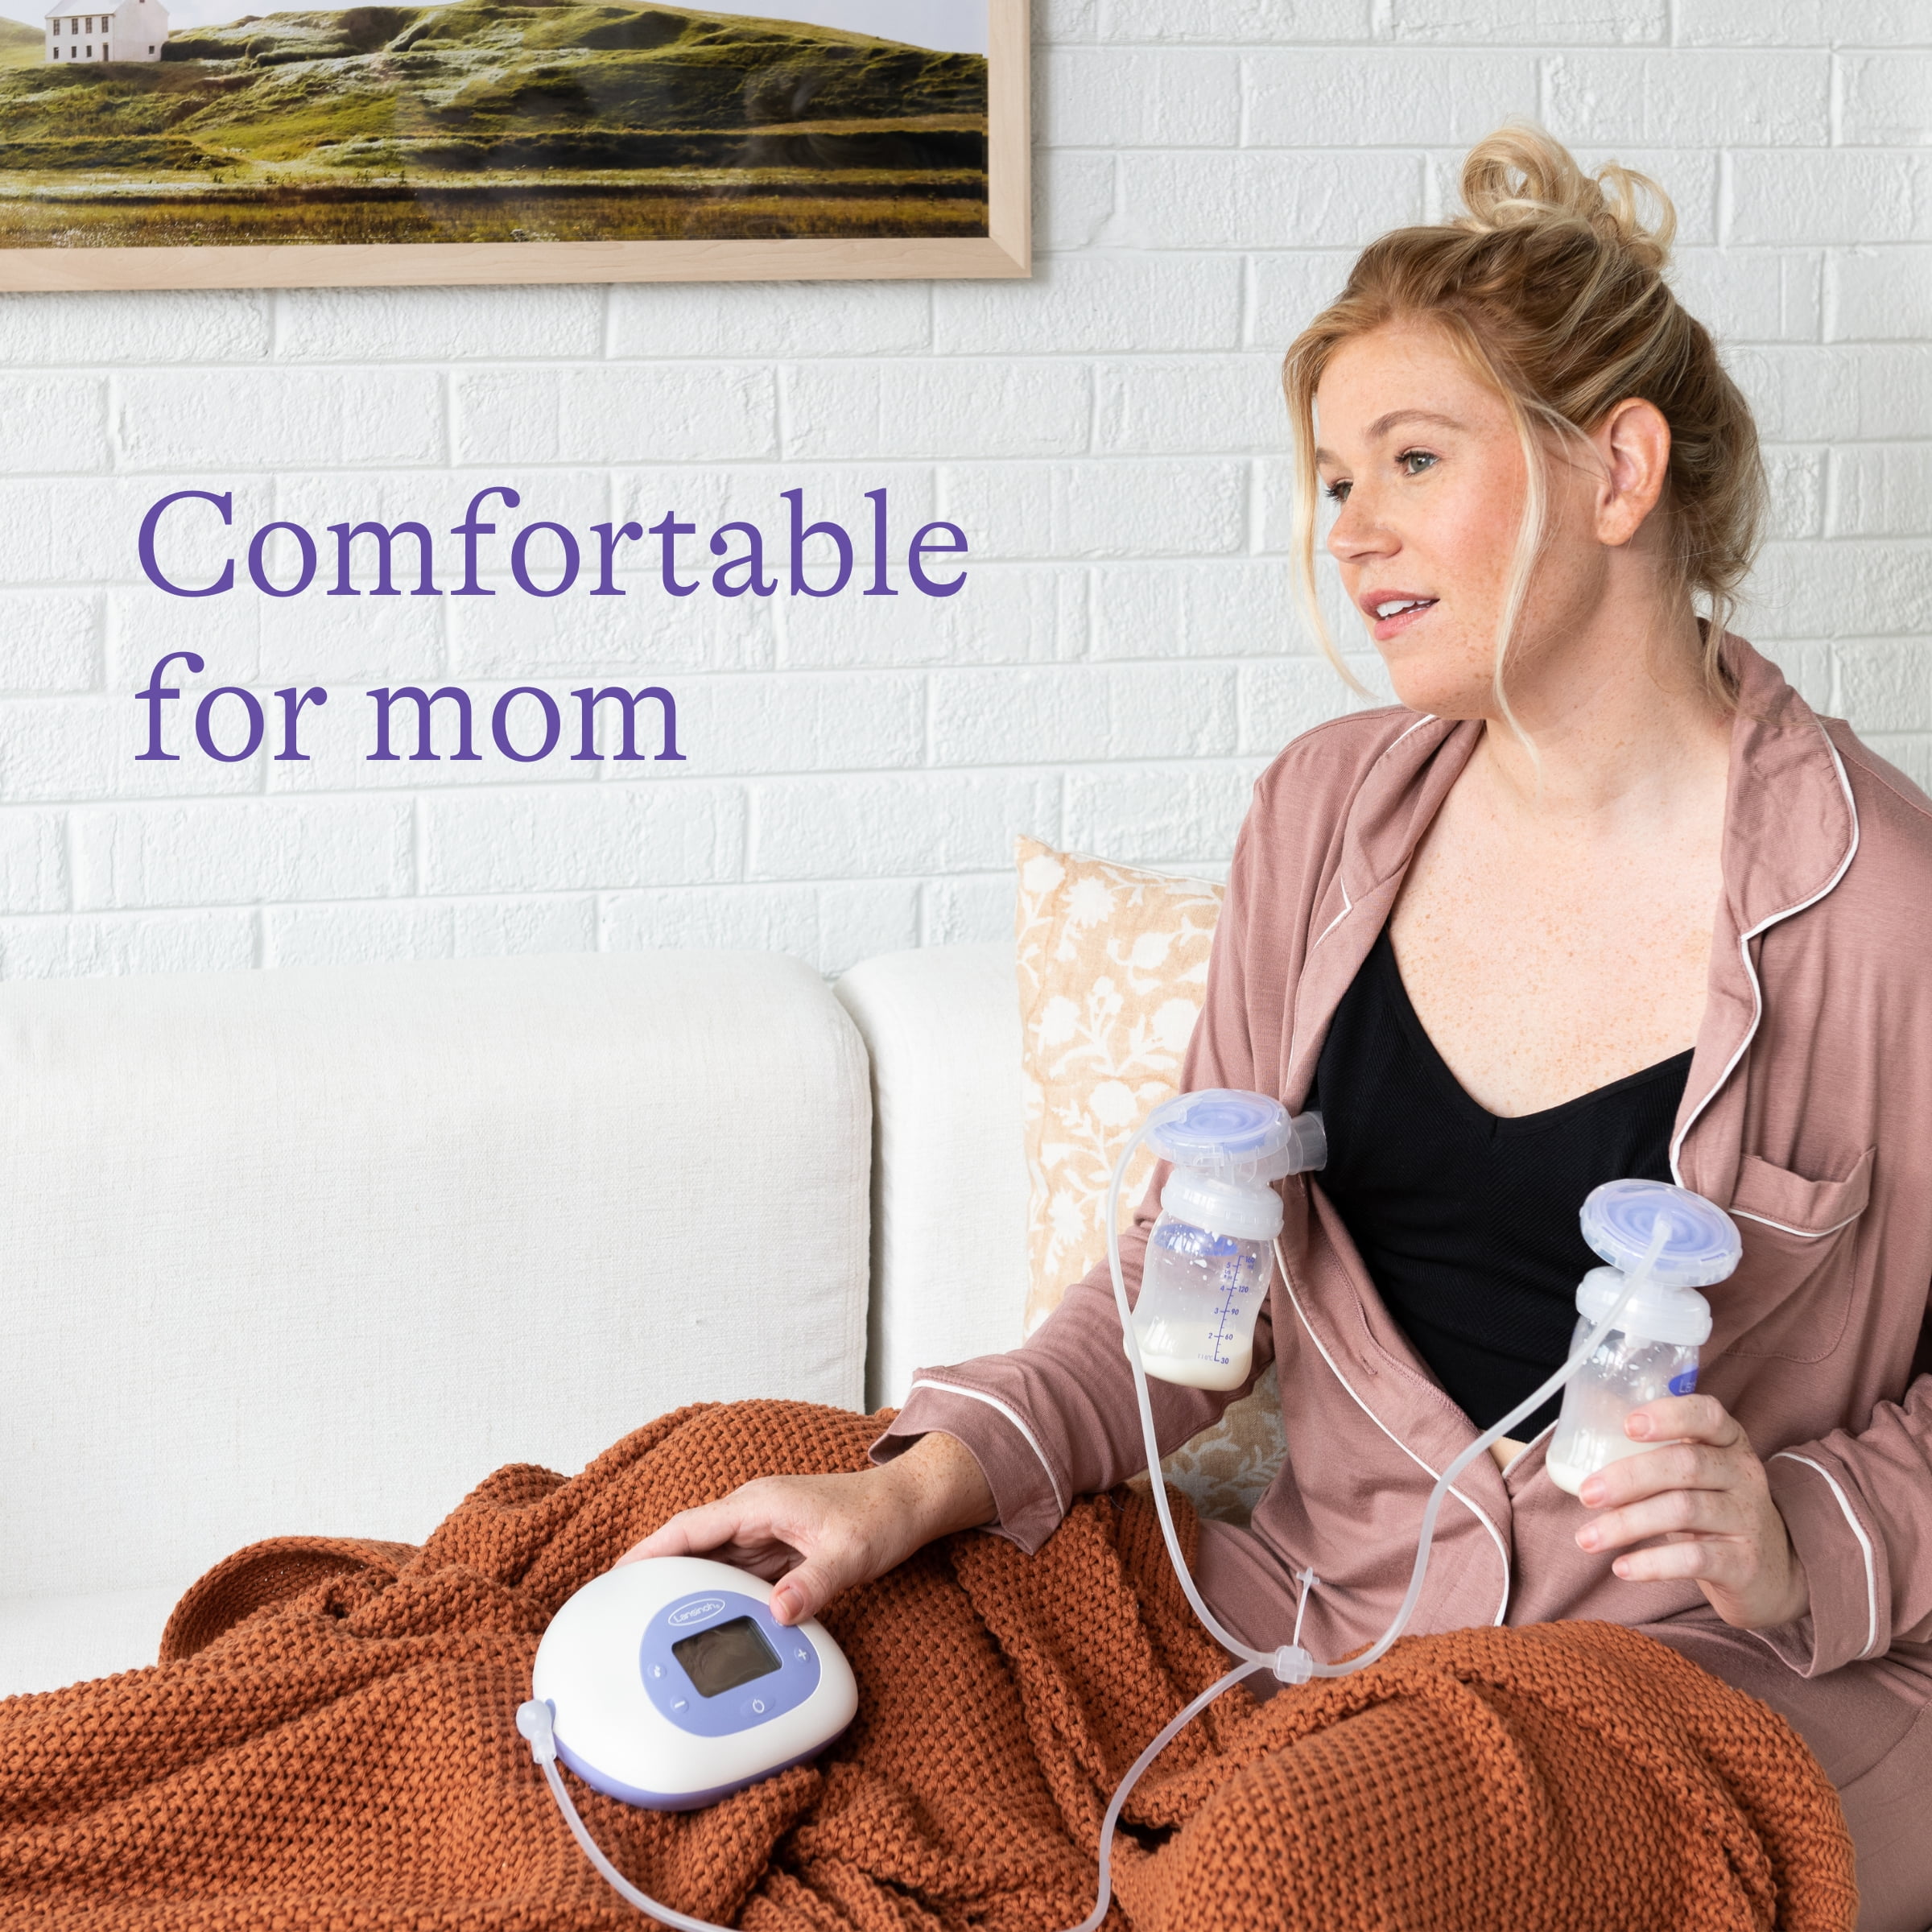 Lansinoh - 2-in-1 Double Electric Breast Pump